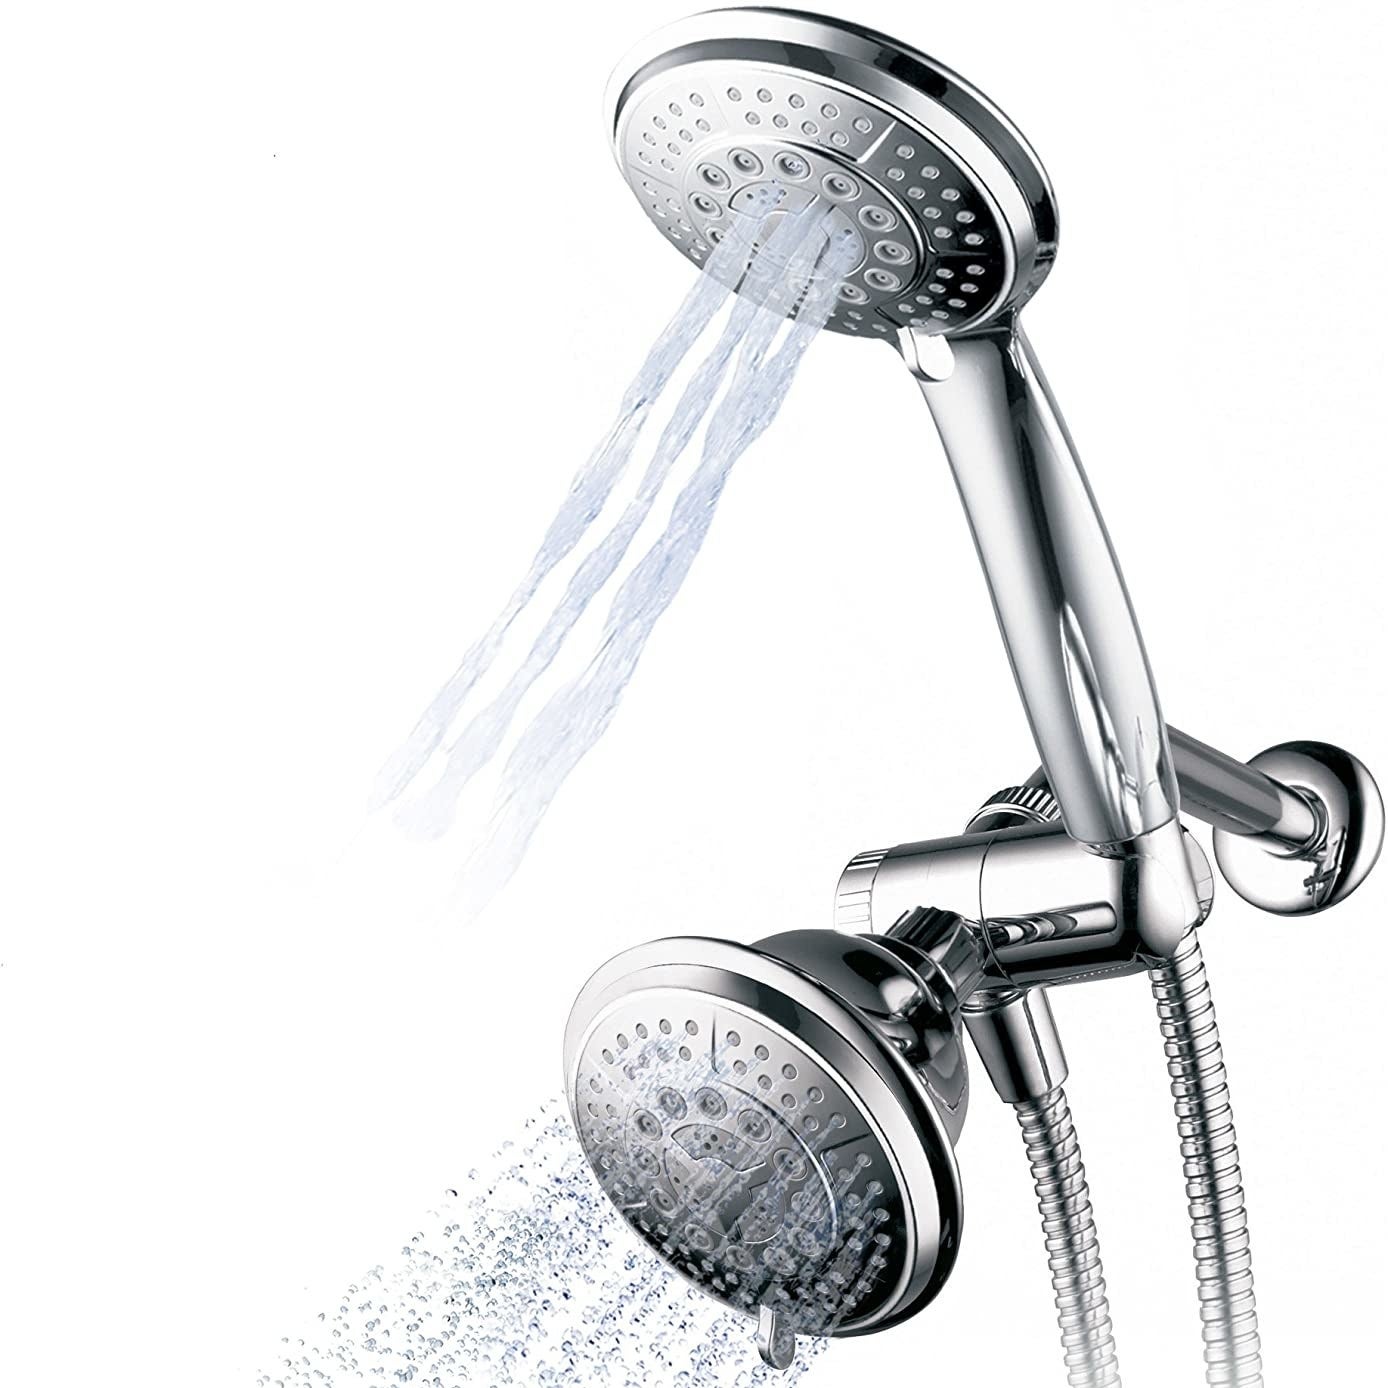 chris eppen recommends how to masturbate with a shower head pic